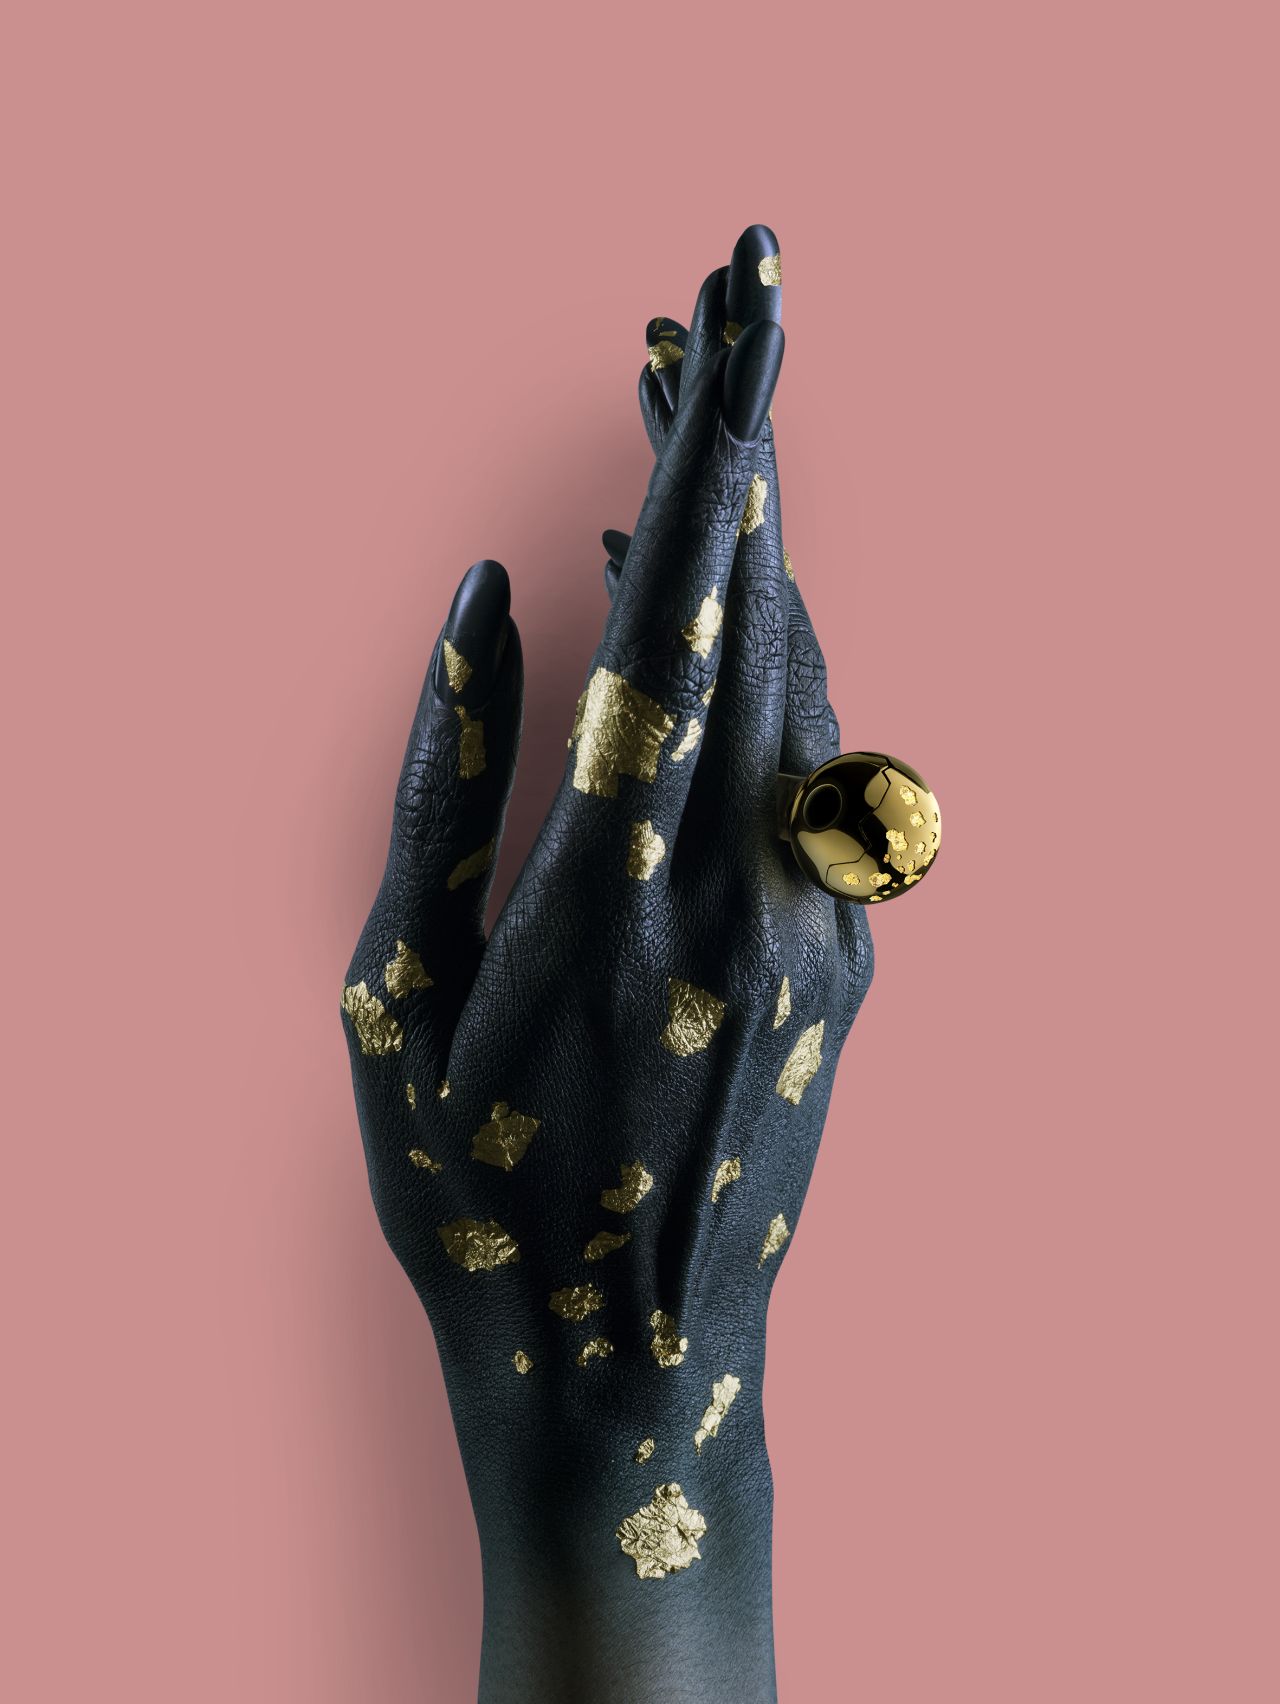 Fine jewelry company, Ore has applied Vantablack to their range of interactive rings. Made of 18-carat gold and olivine crystals, each ring is paired with a single star. As the star reaches its zenith position, LED lights glow through the crystals. 